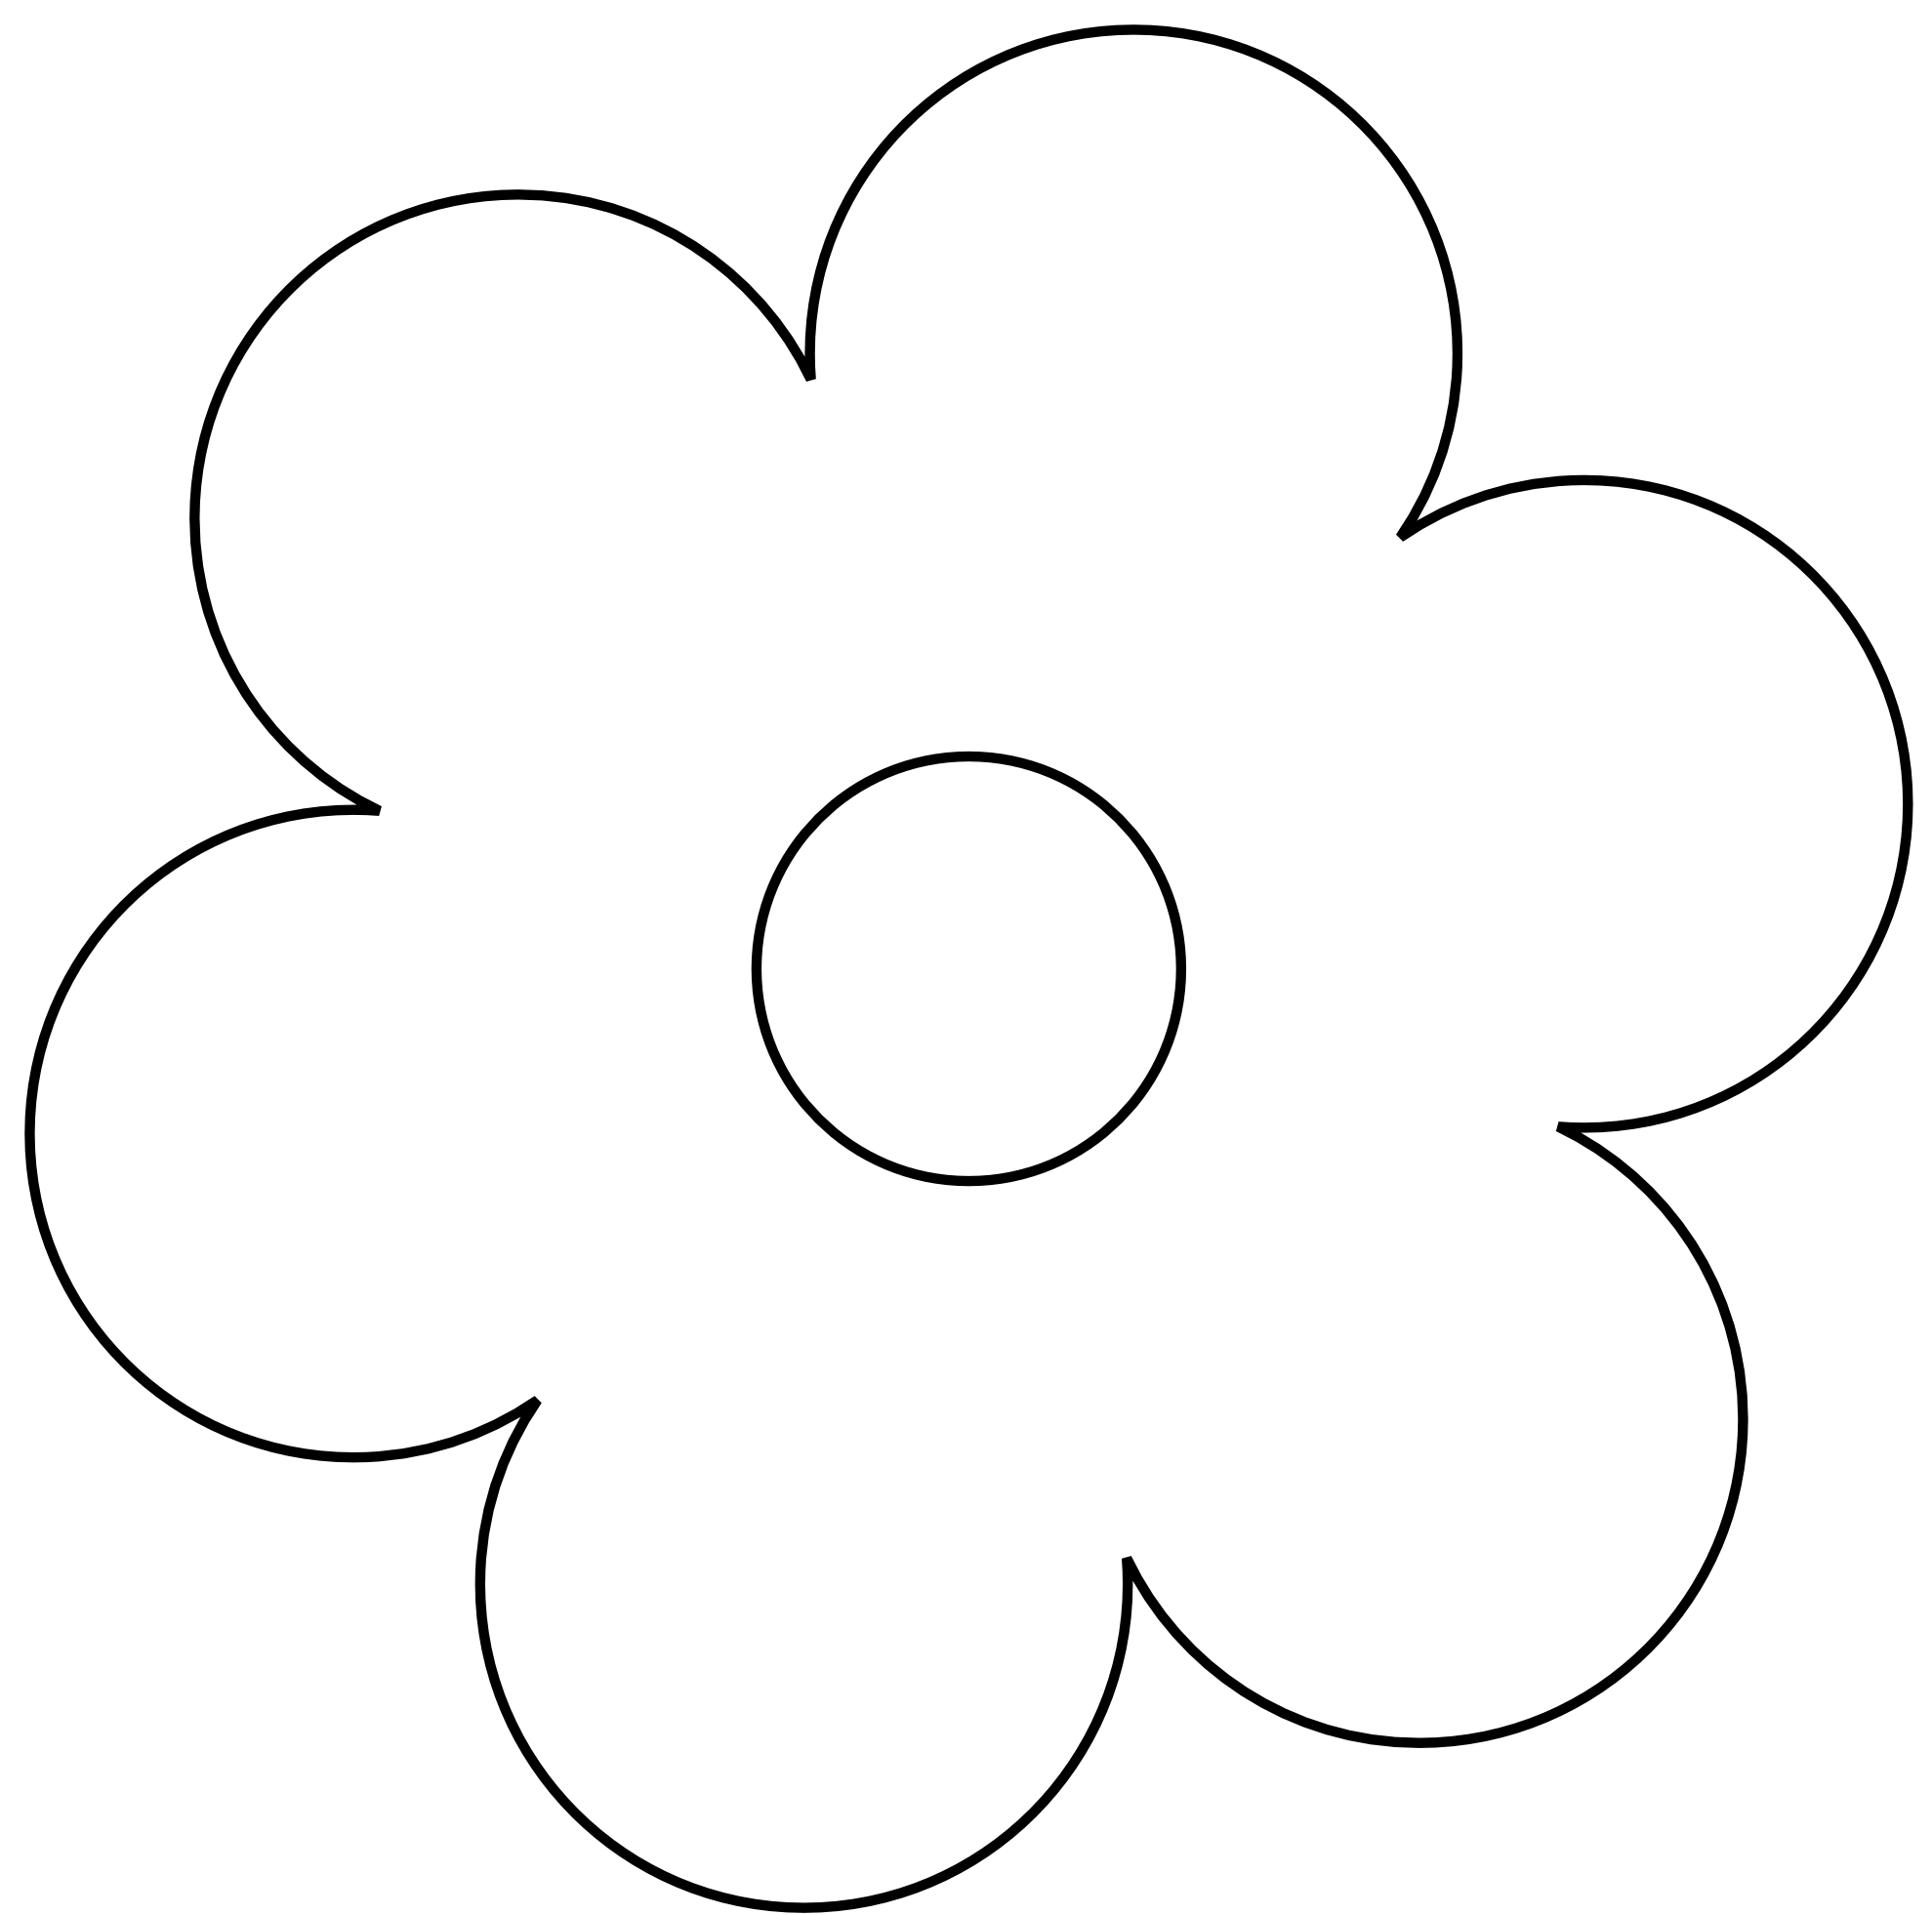 Black And White Flower Clipart - ClipArt Best